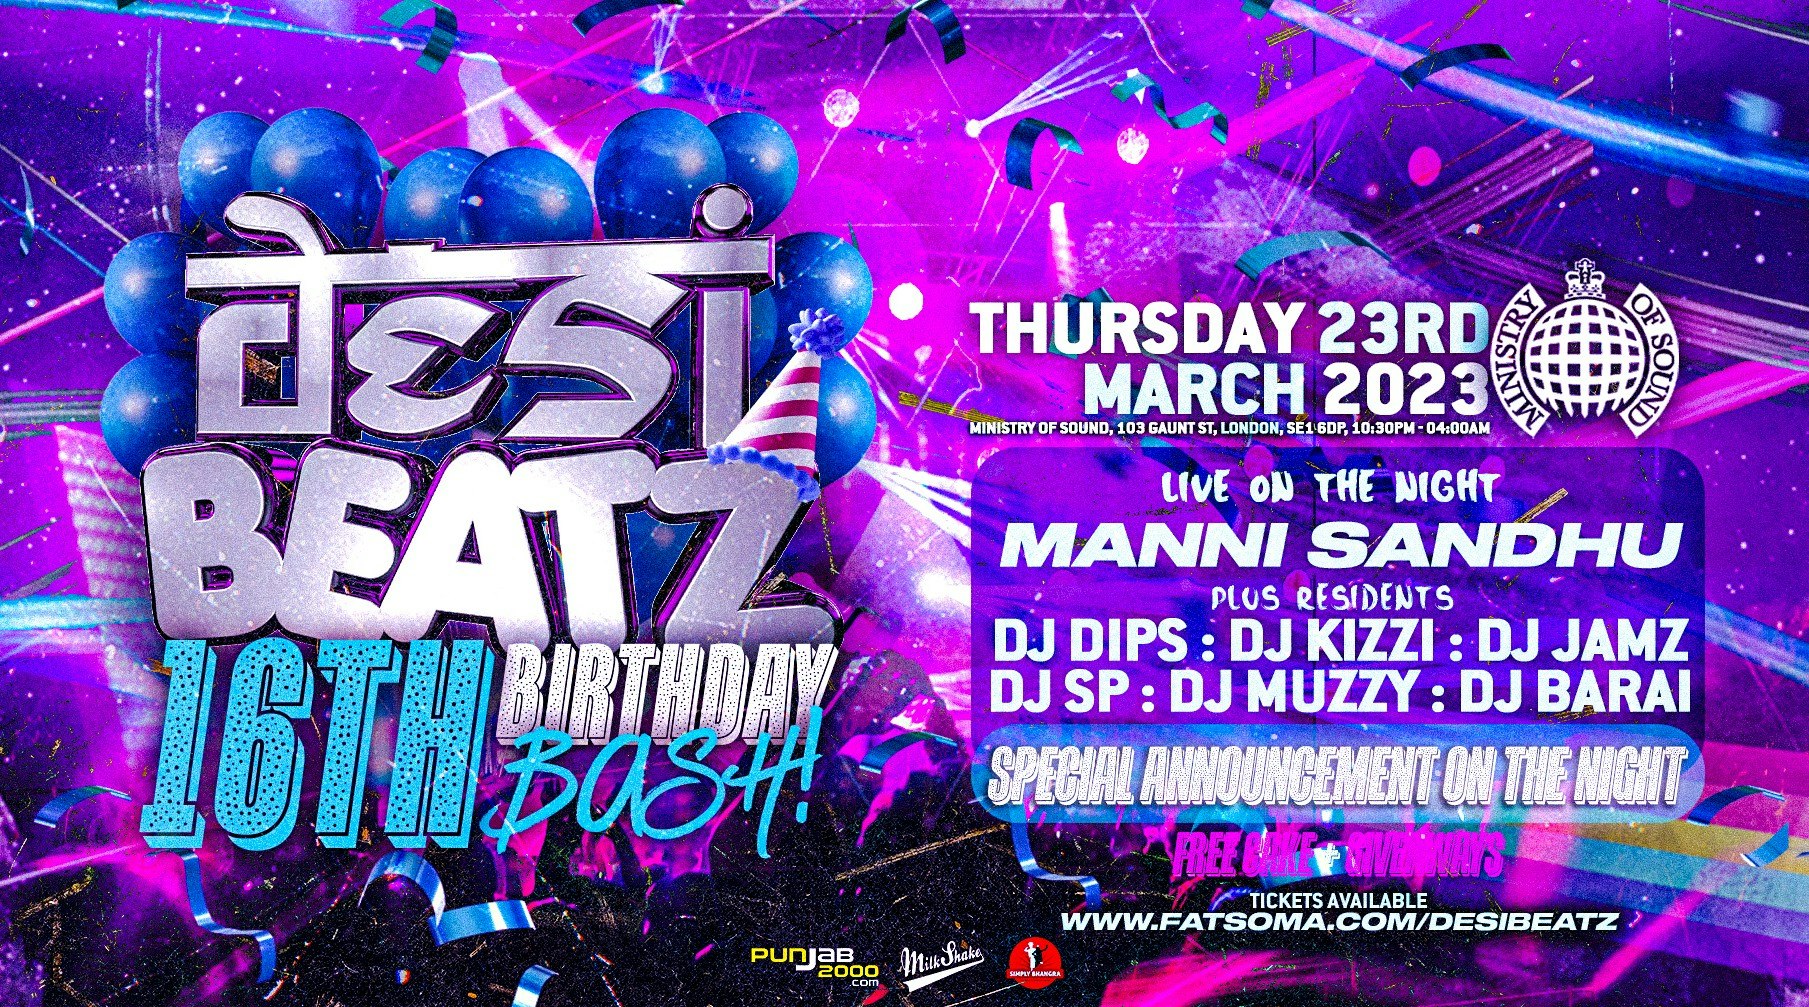 SURREY Goes to DESI BEATZ @ Ministry of Sound! at Ministry of Sound, London on 23rd Mar